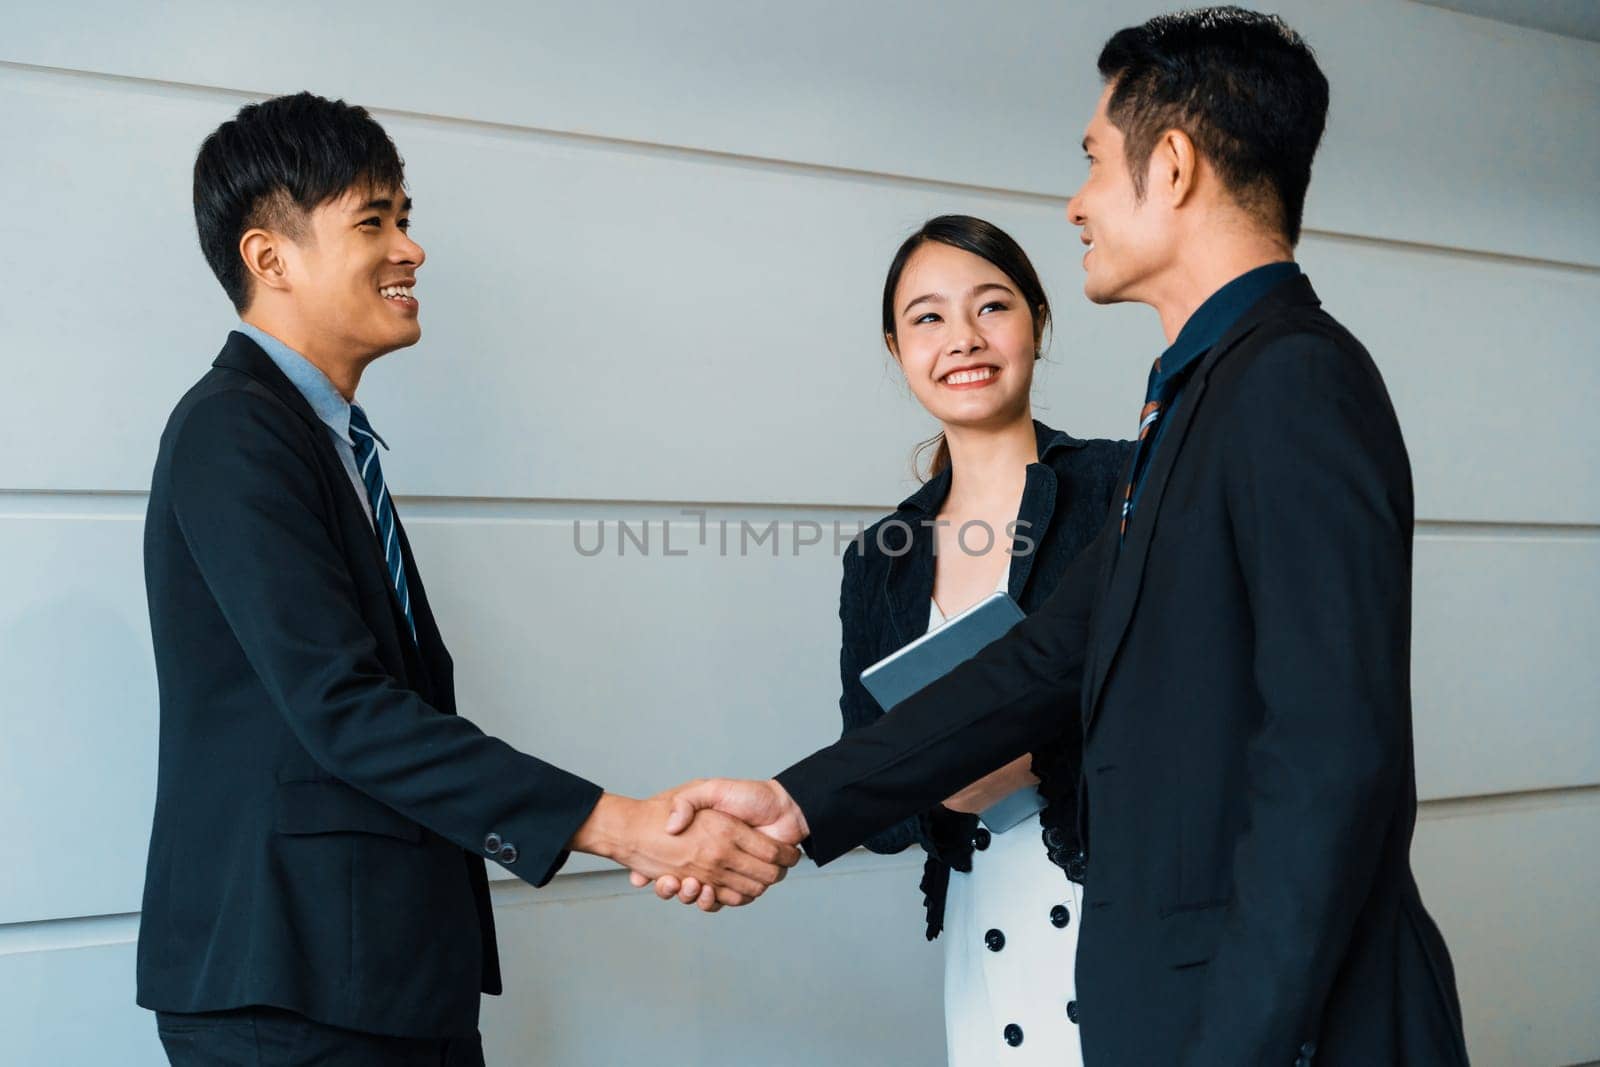 Business people agreement concept. Businessman do handshake with another businessman in the office meeting room. Young Asian secretary lady stands beside them. uds